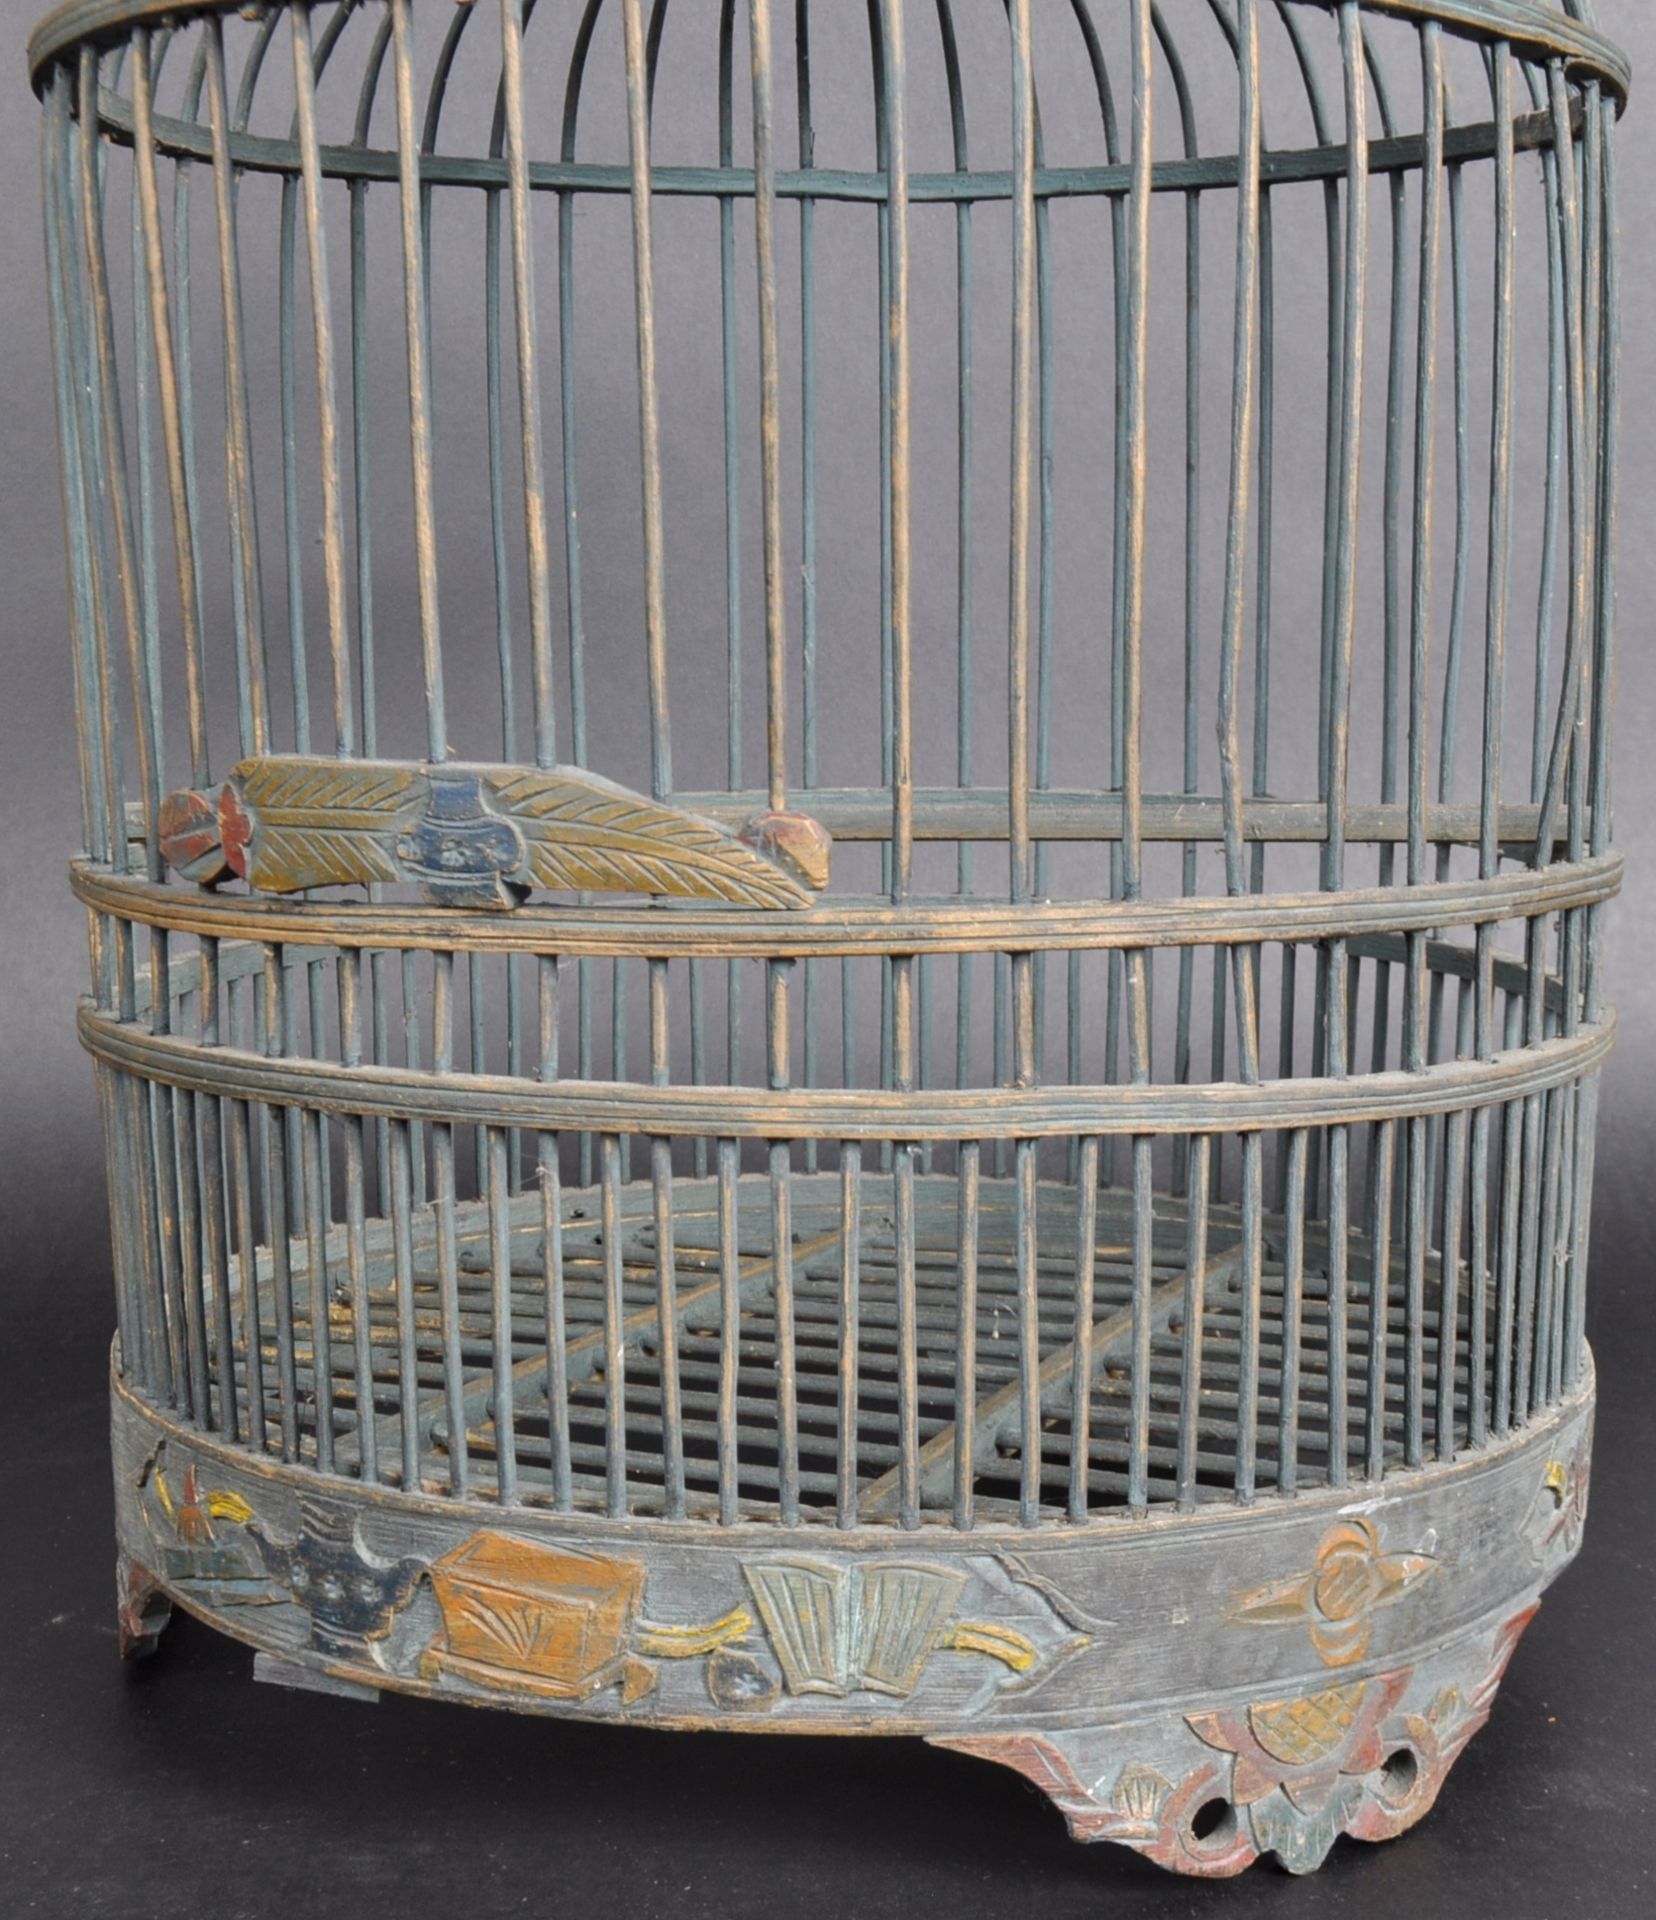 EARLY 20TH CENTURY CHINESE WOODEN BIRDCAGE - Image 5 of 6